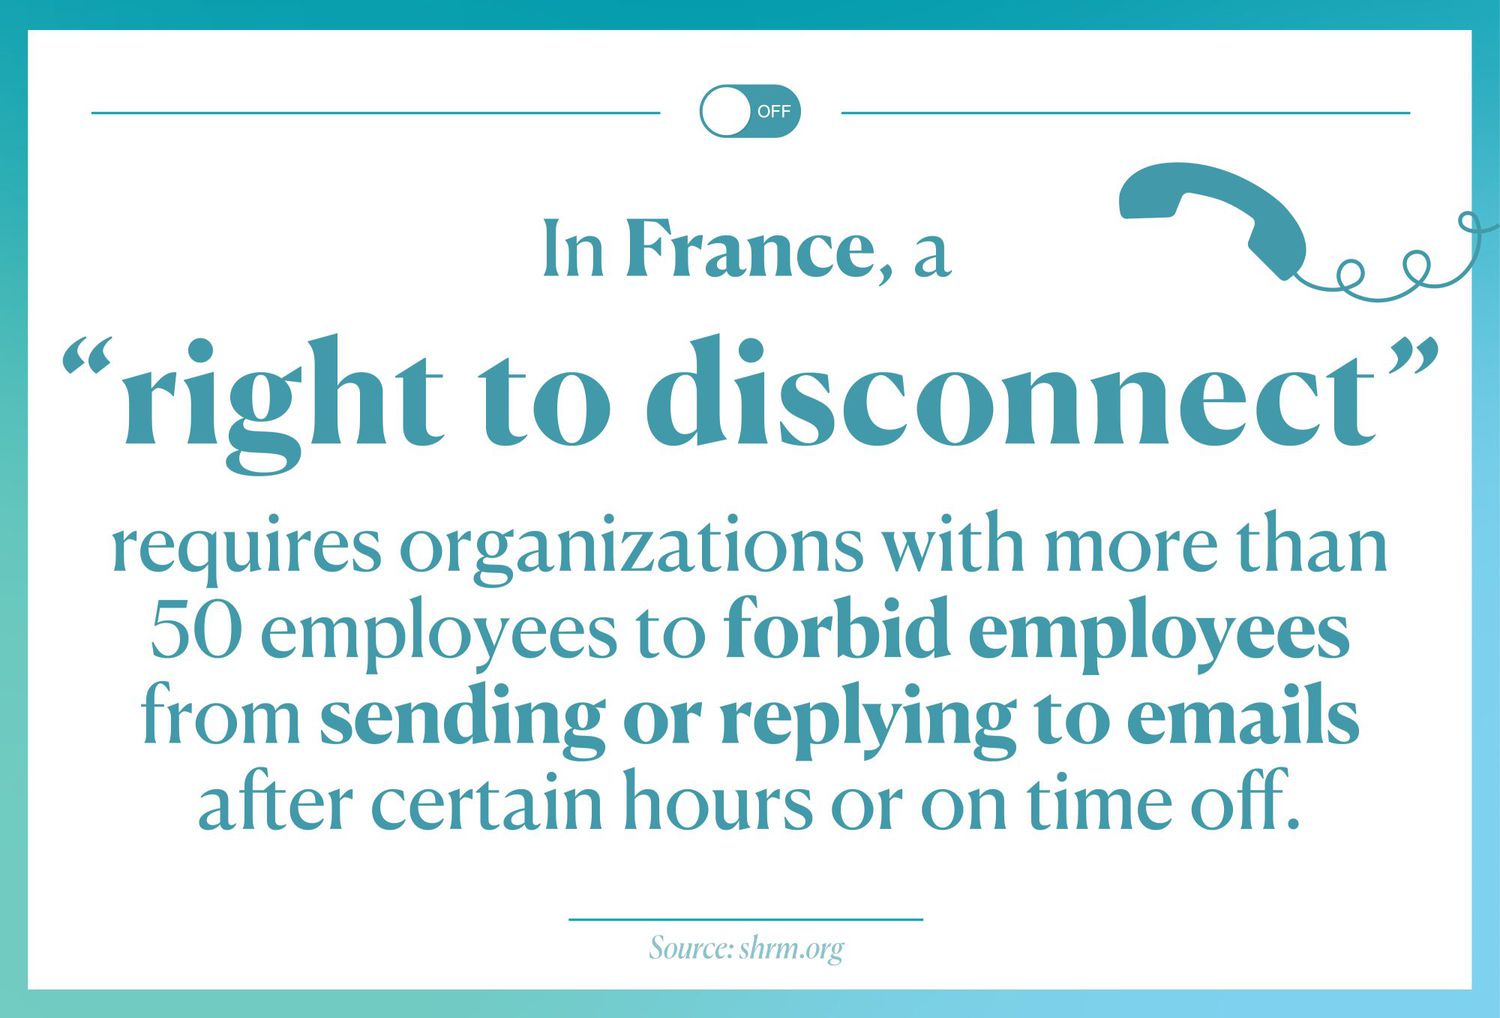 France right to disconnect from work. no emails after work hours